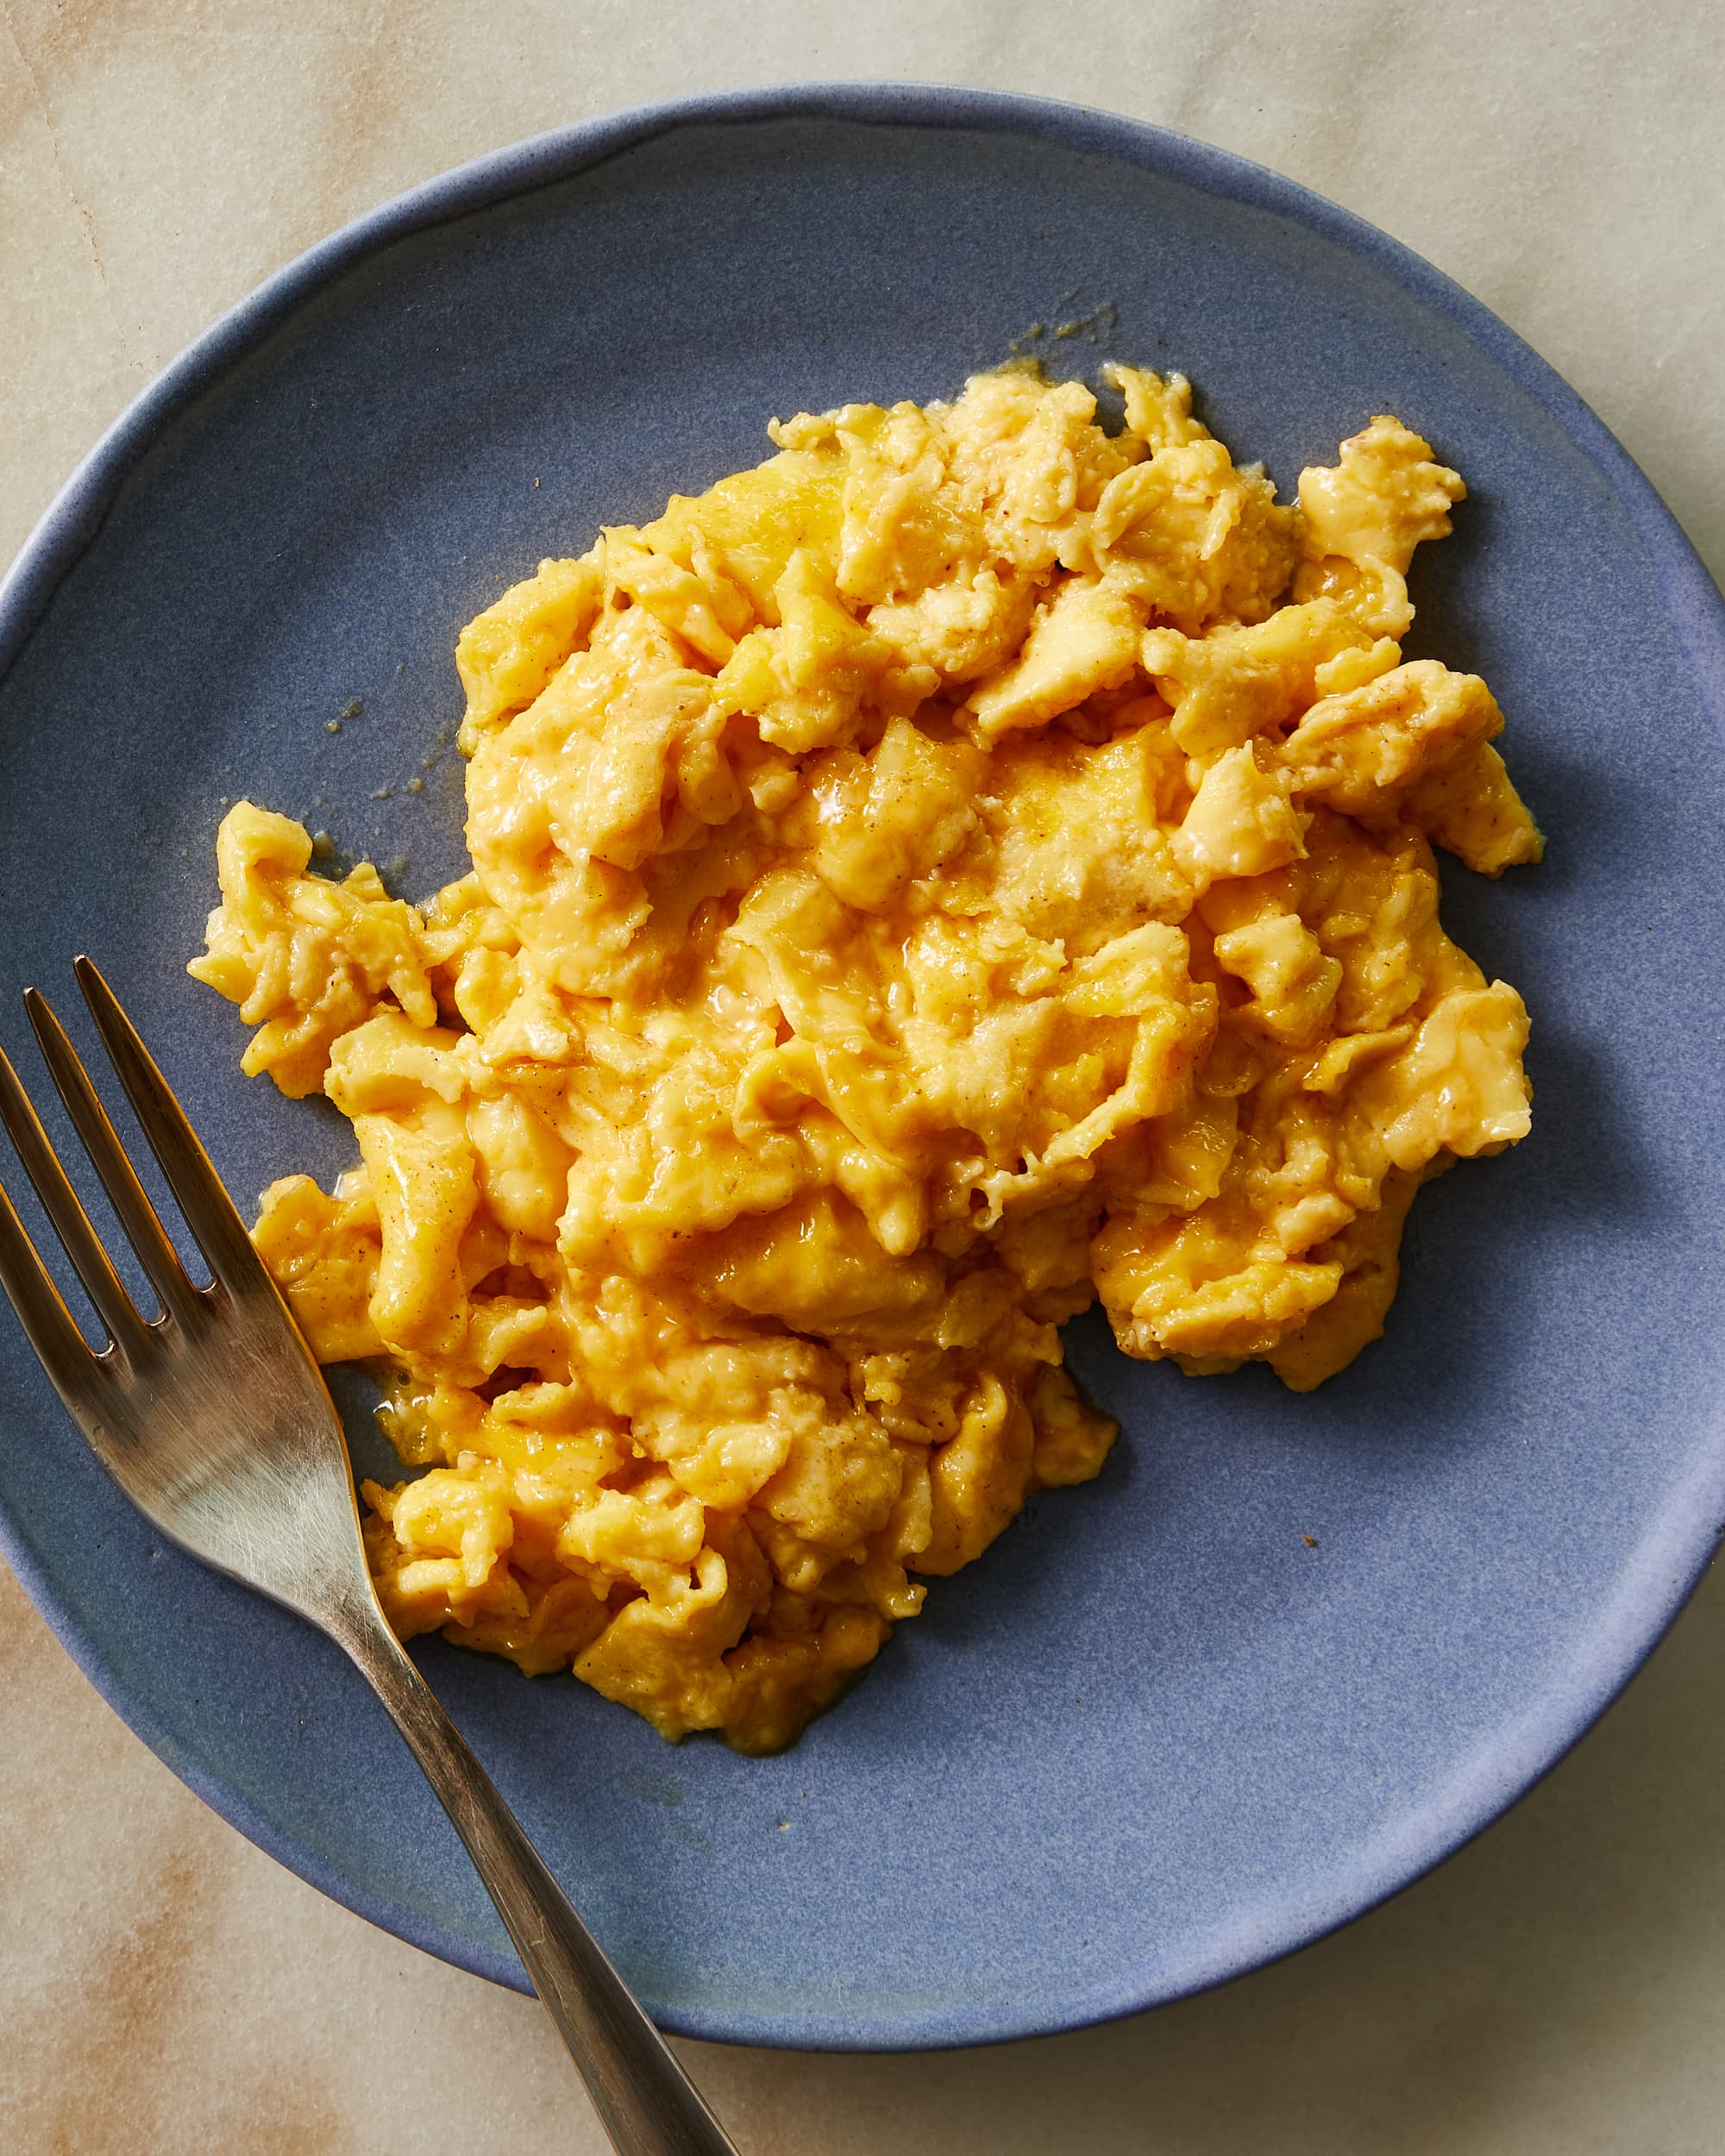 Oven Scrambled Eggs - The Girl Who Ate Everything